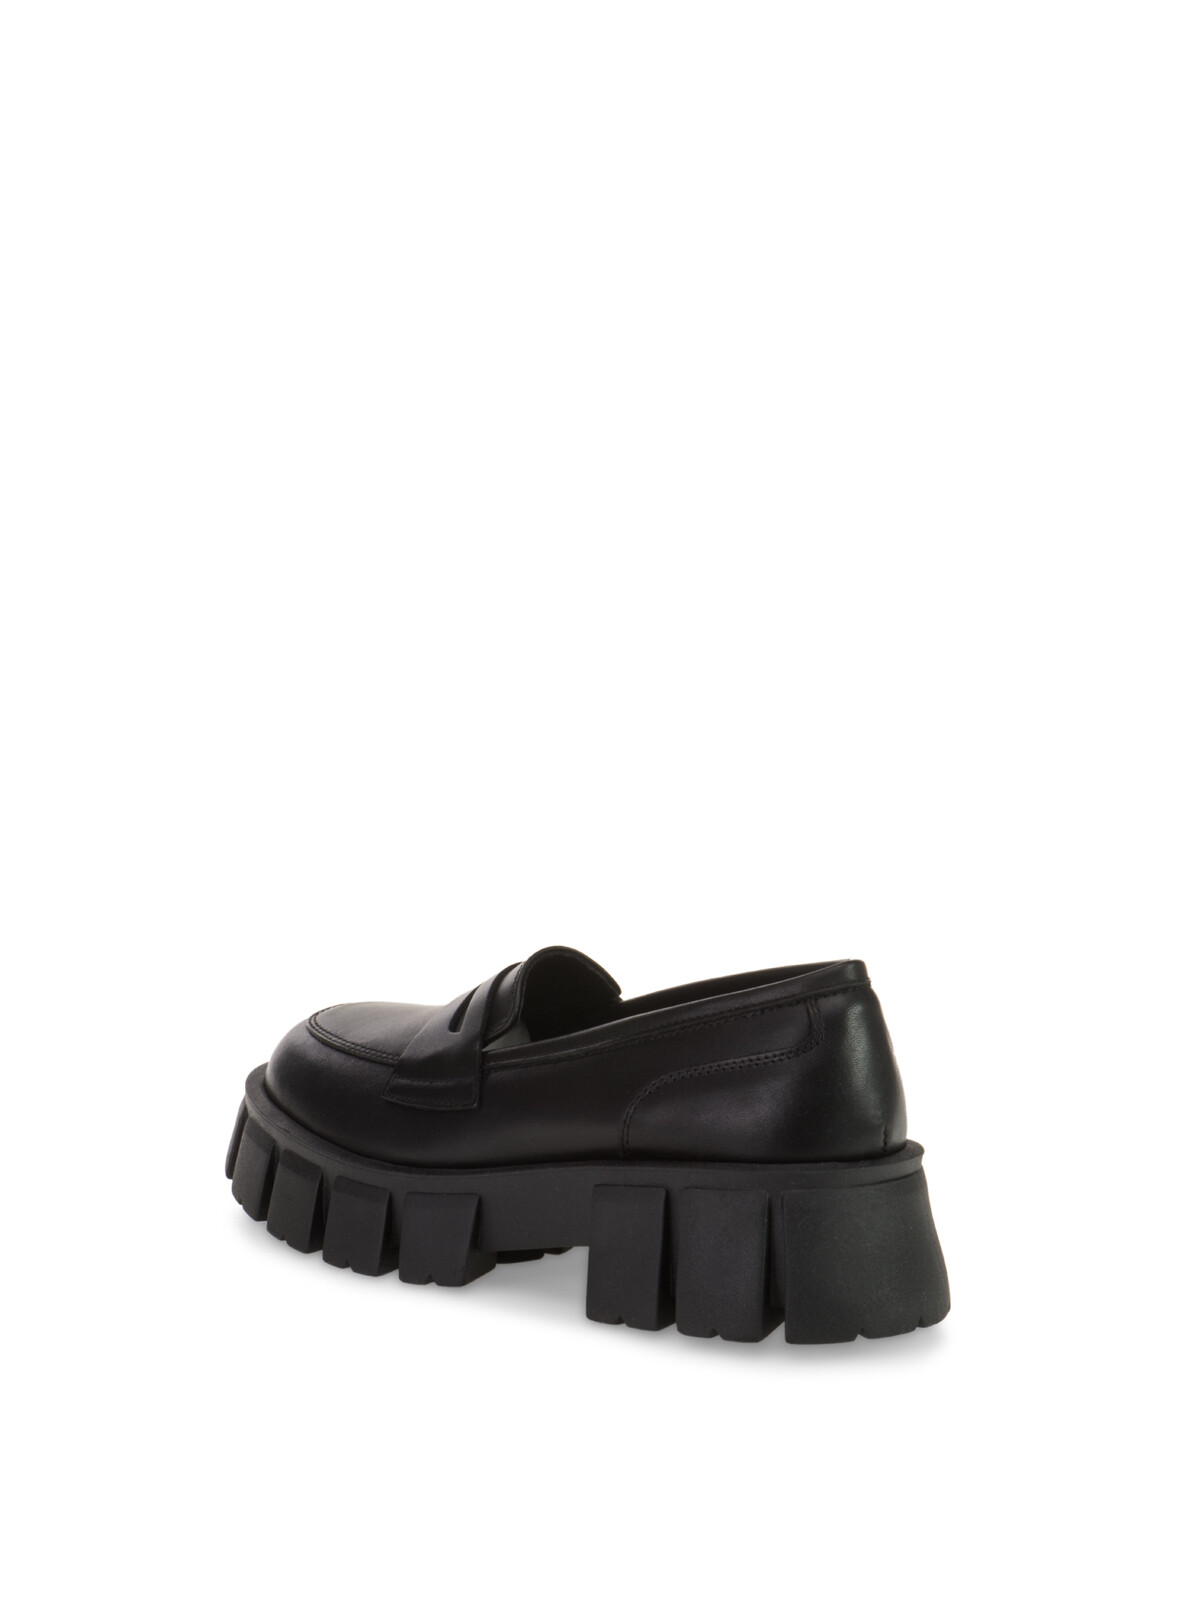 Loafers NEGRO